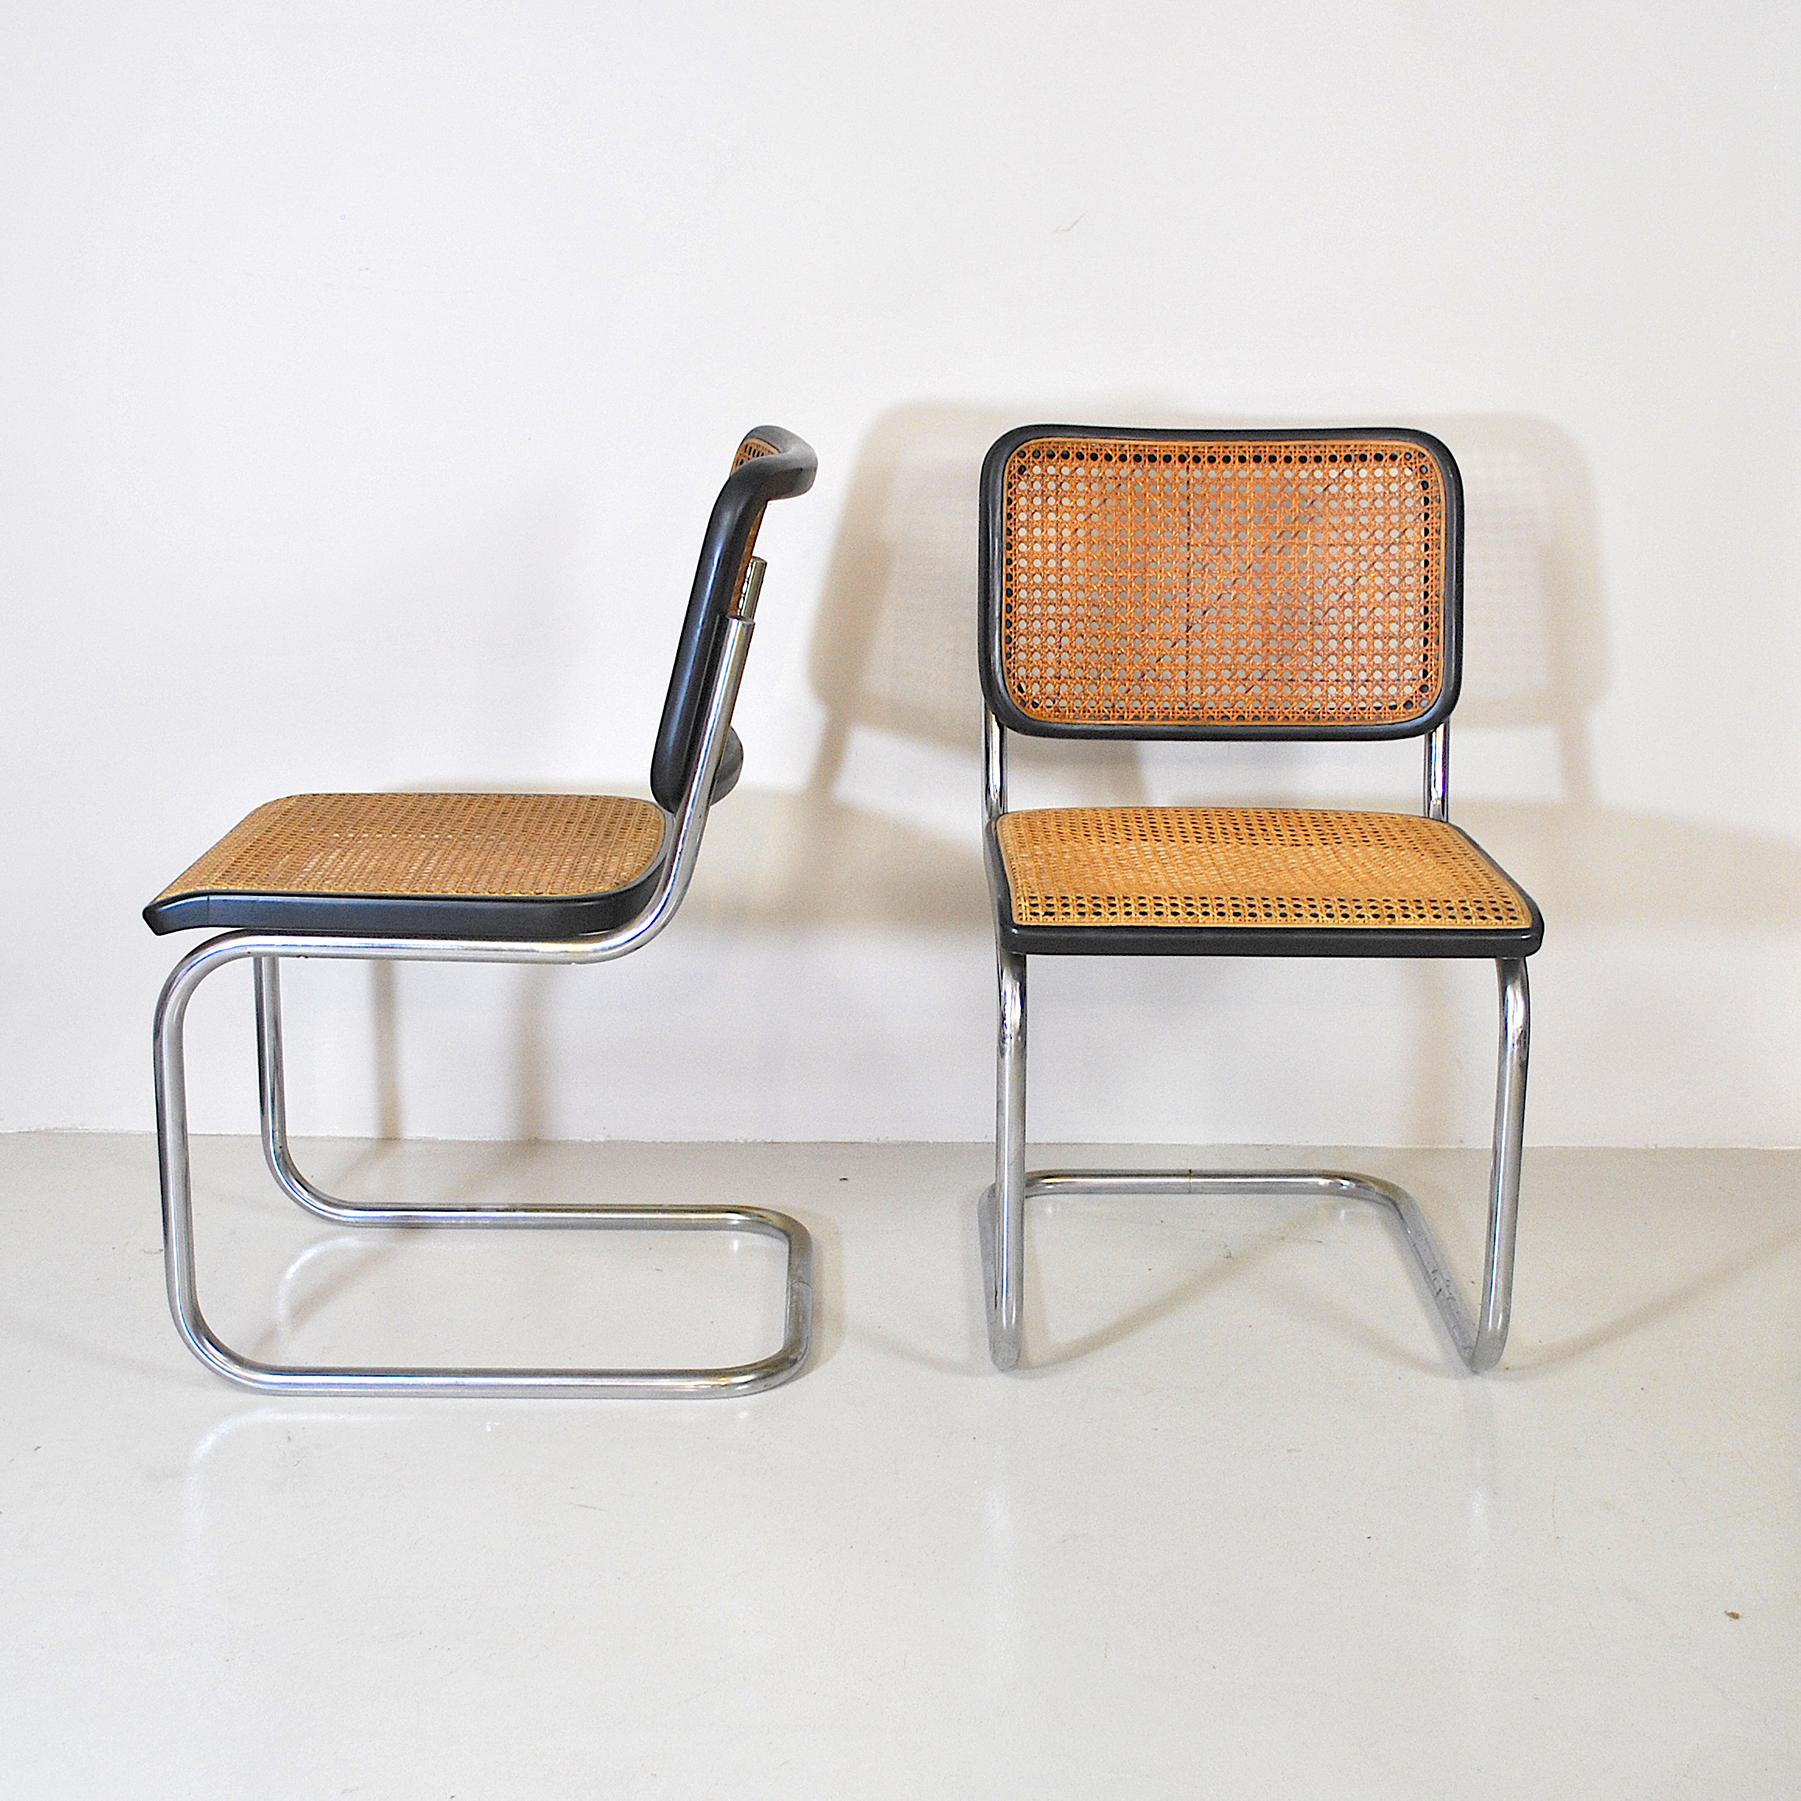 Stainless Steel Marce Breur Midcentury Chairs Model Cesca by Thonet, 1970s